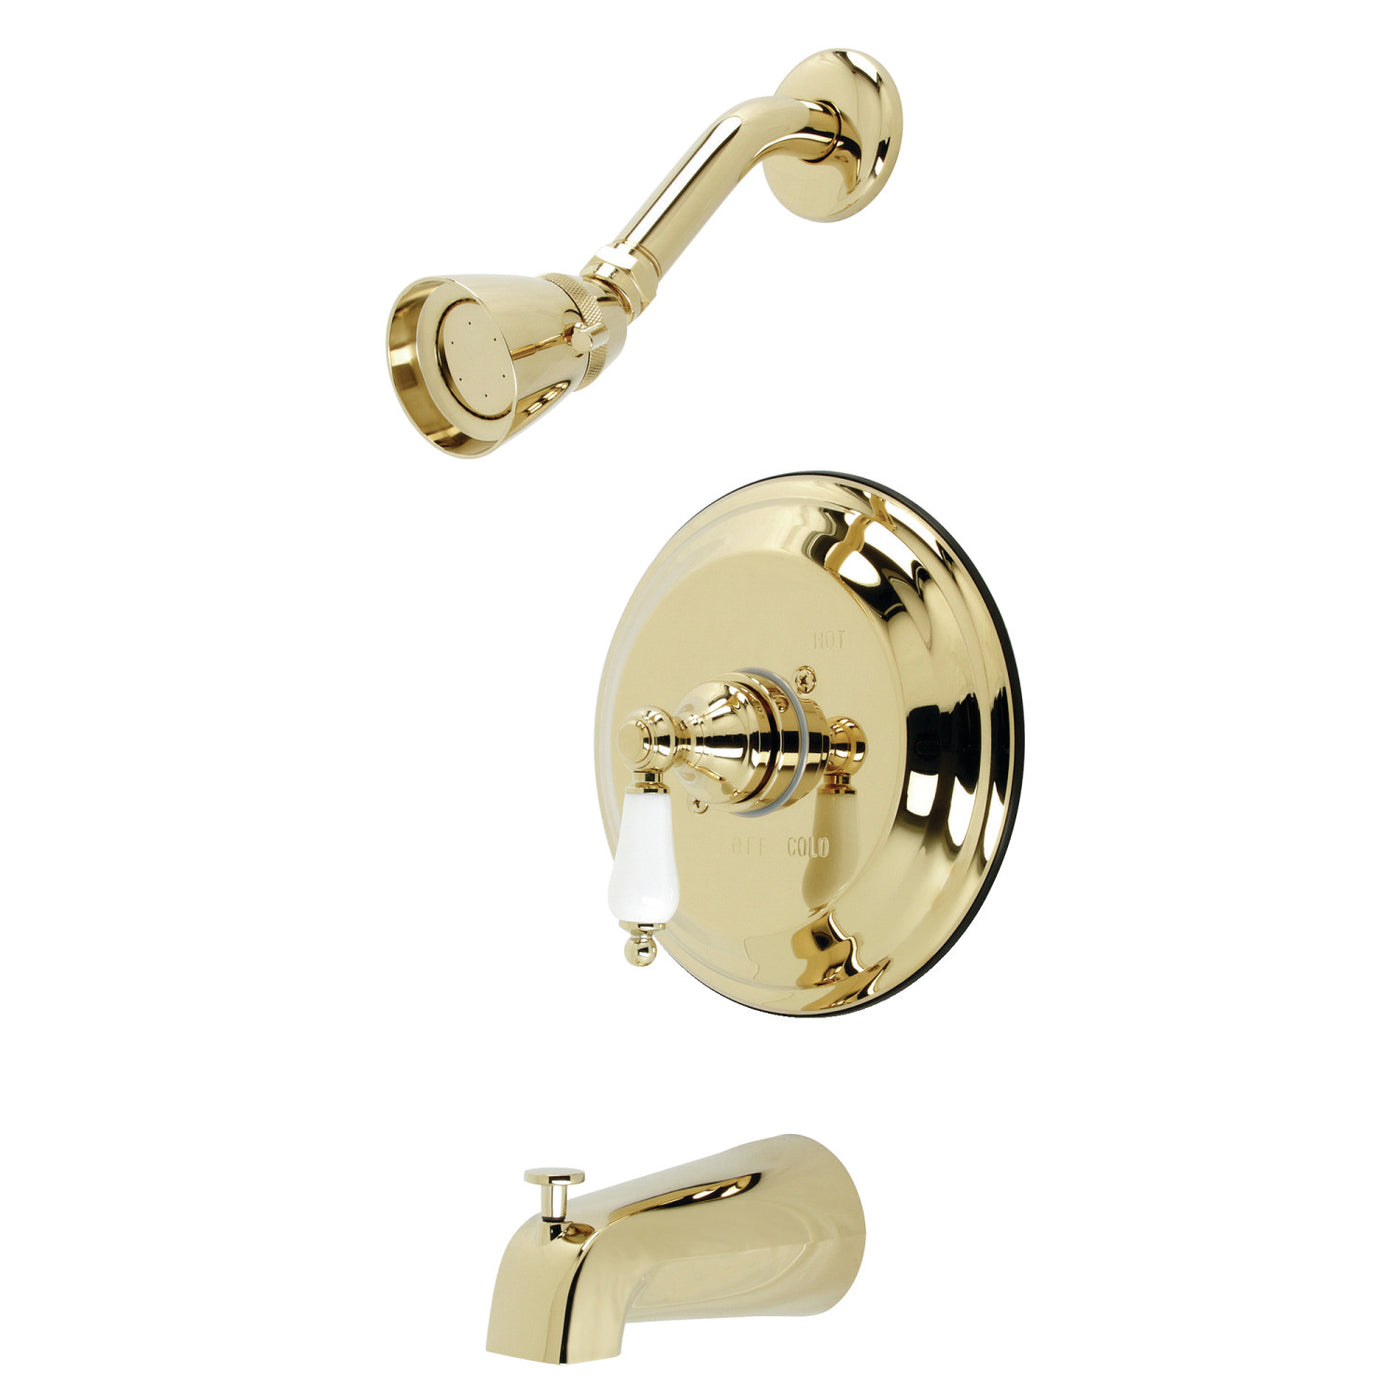 Elements of Design EB3632PL Tub and Shower Faucet, Polished Brass